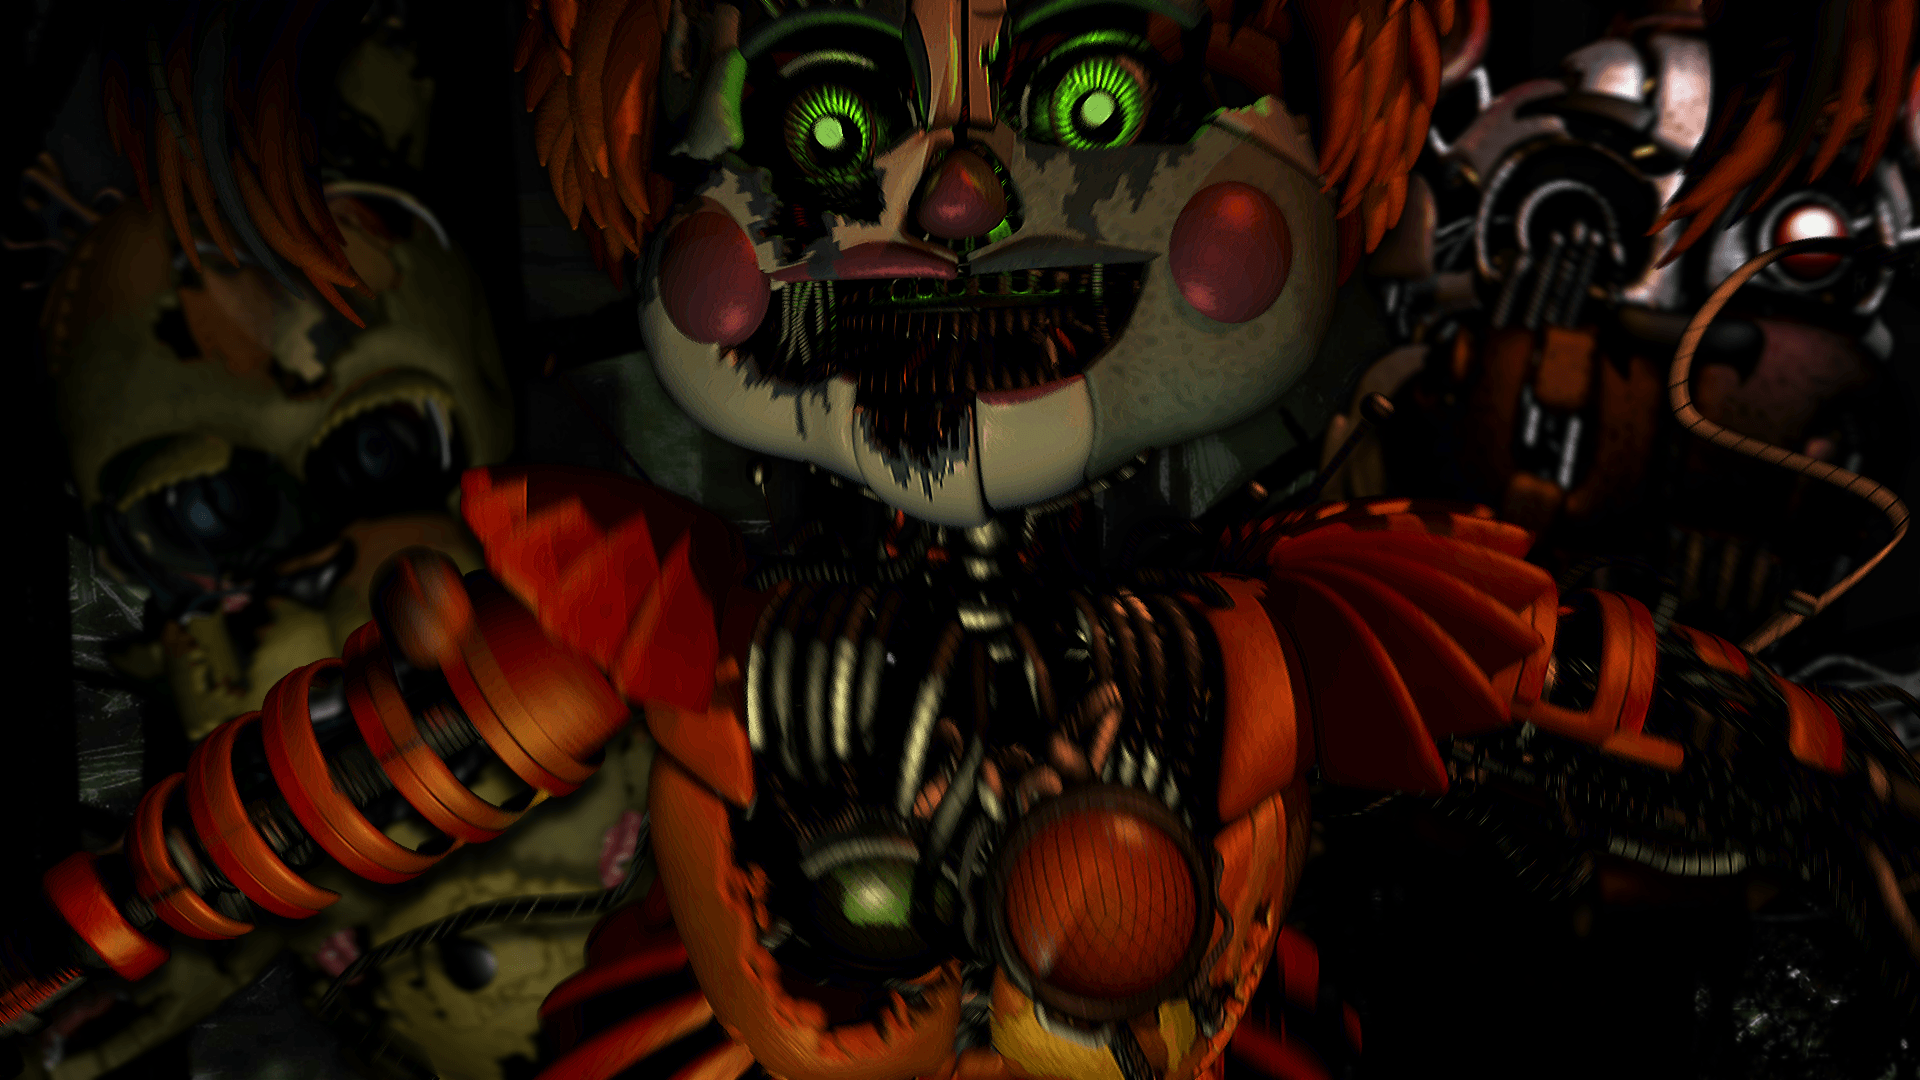 Made a simple FNaF 6 wallpaper from the animatronics' jumpscare